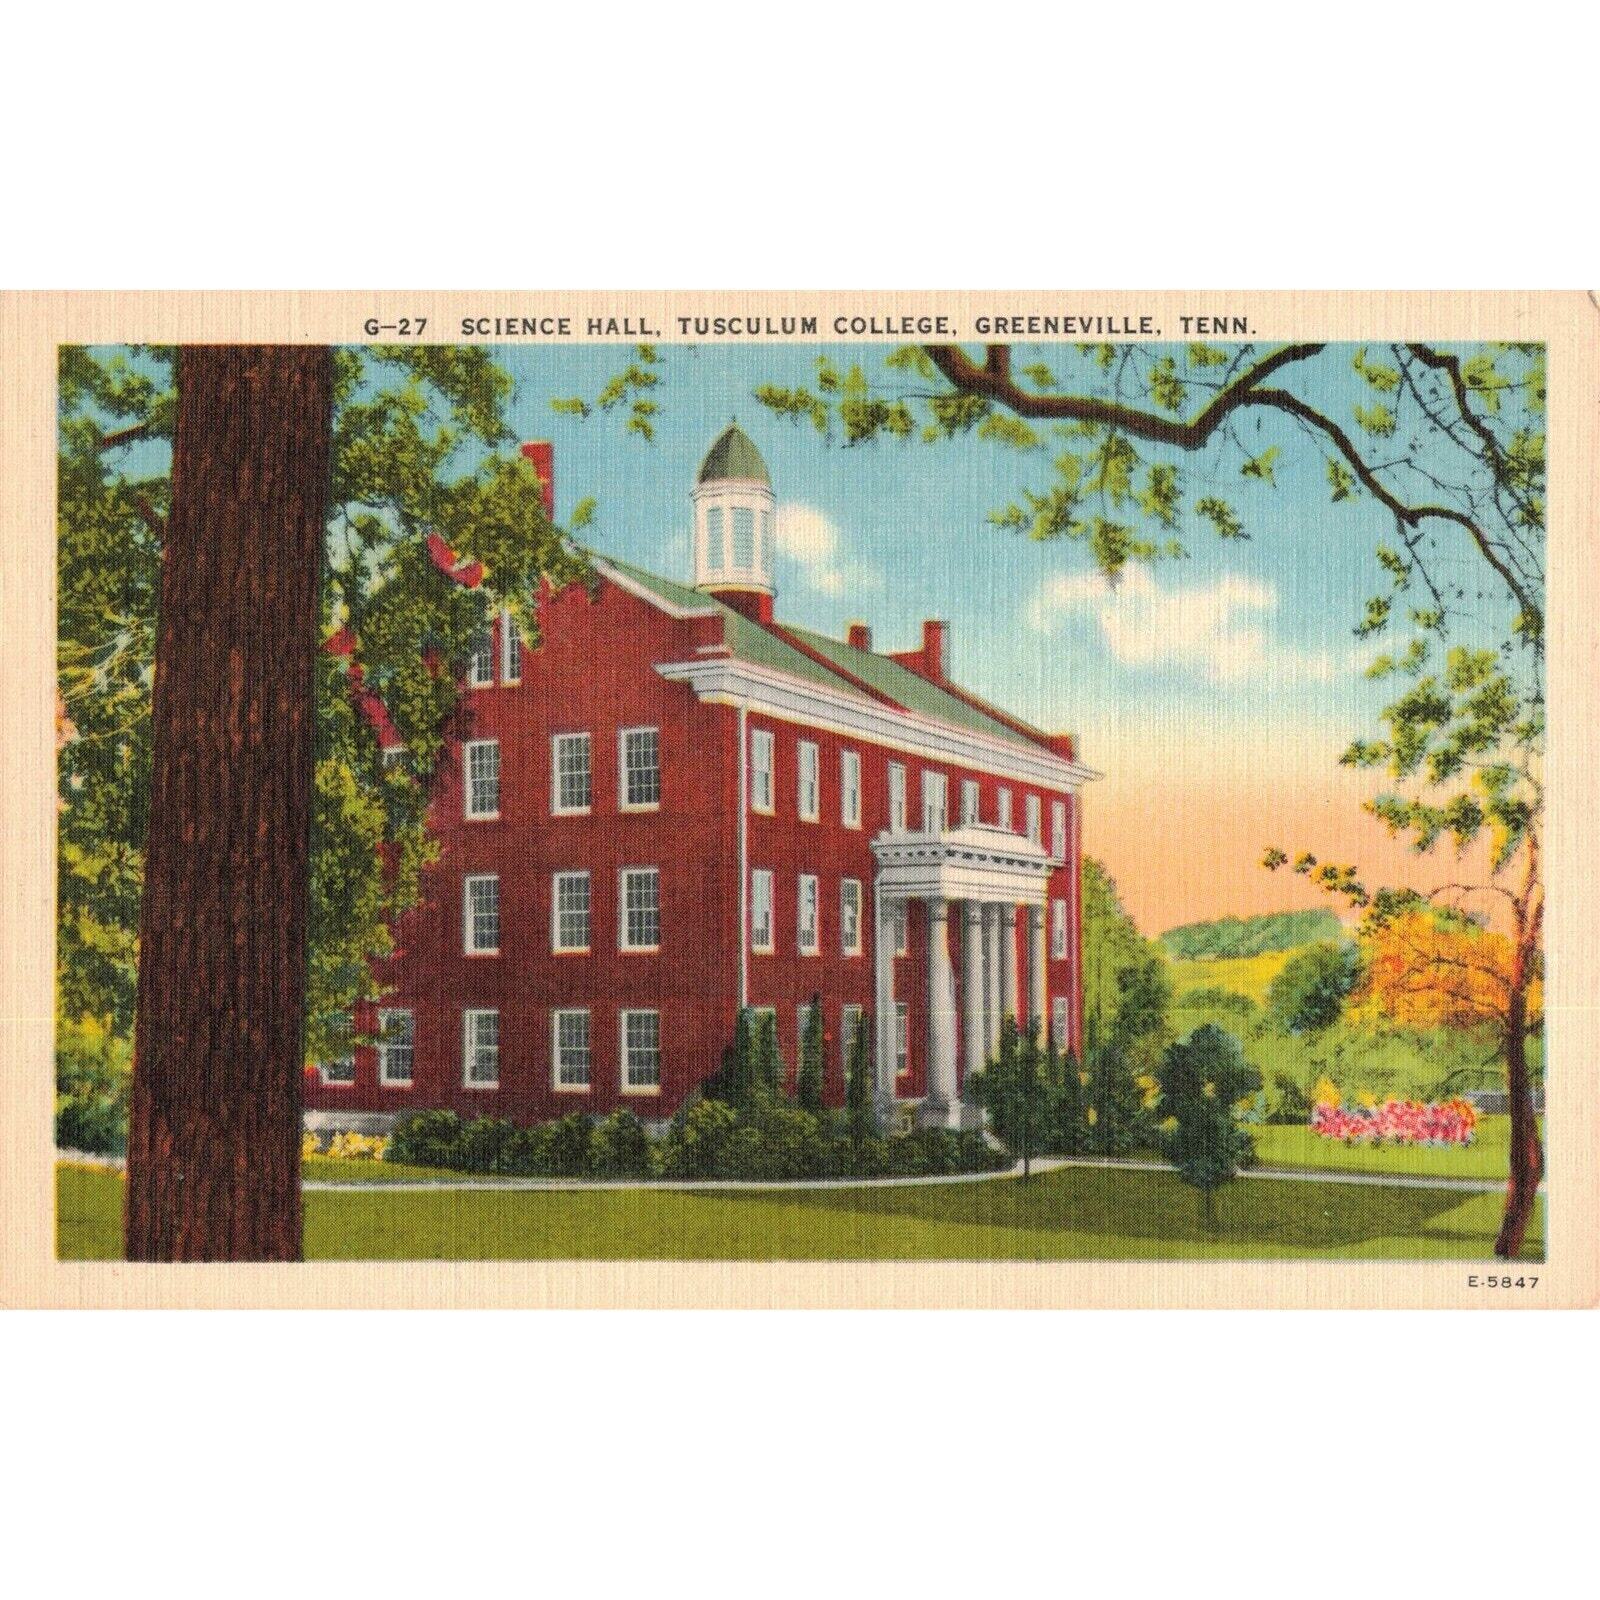 Science Hall Tusculum College Greenville Tennessee Linen Postcard 2T5-80